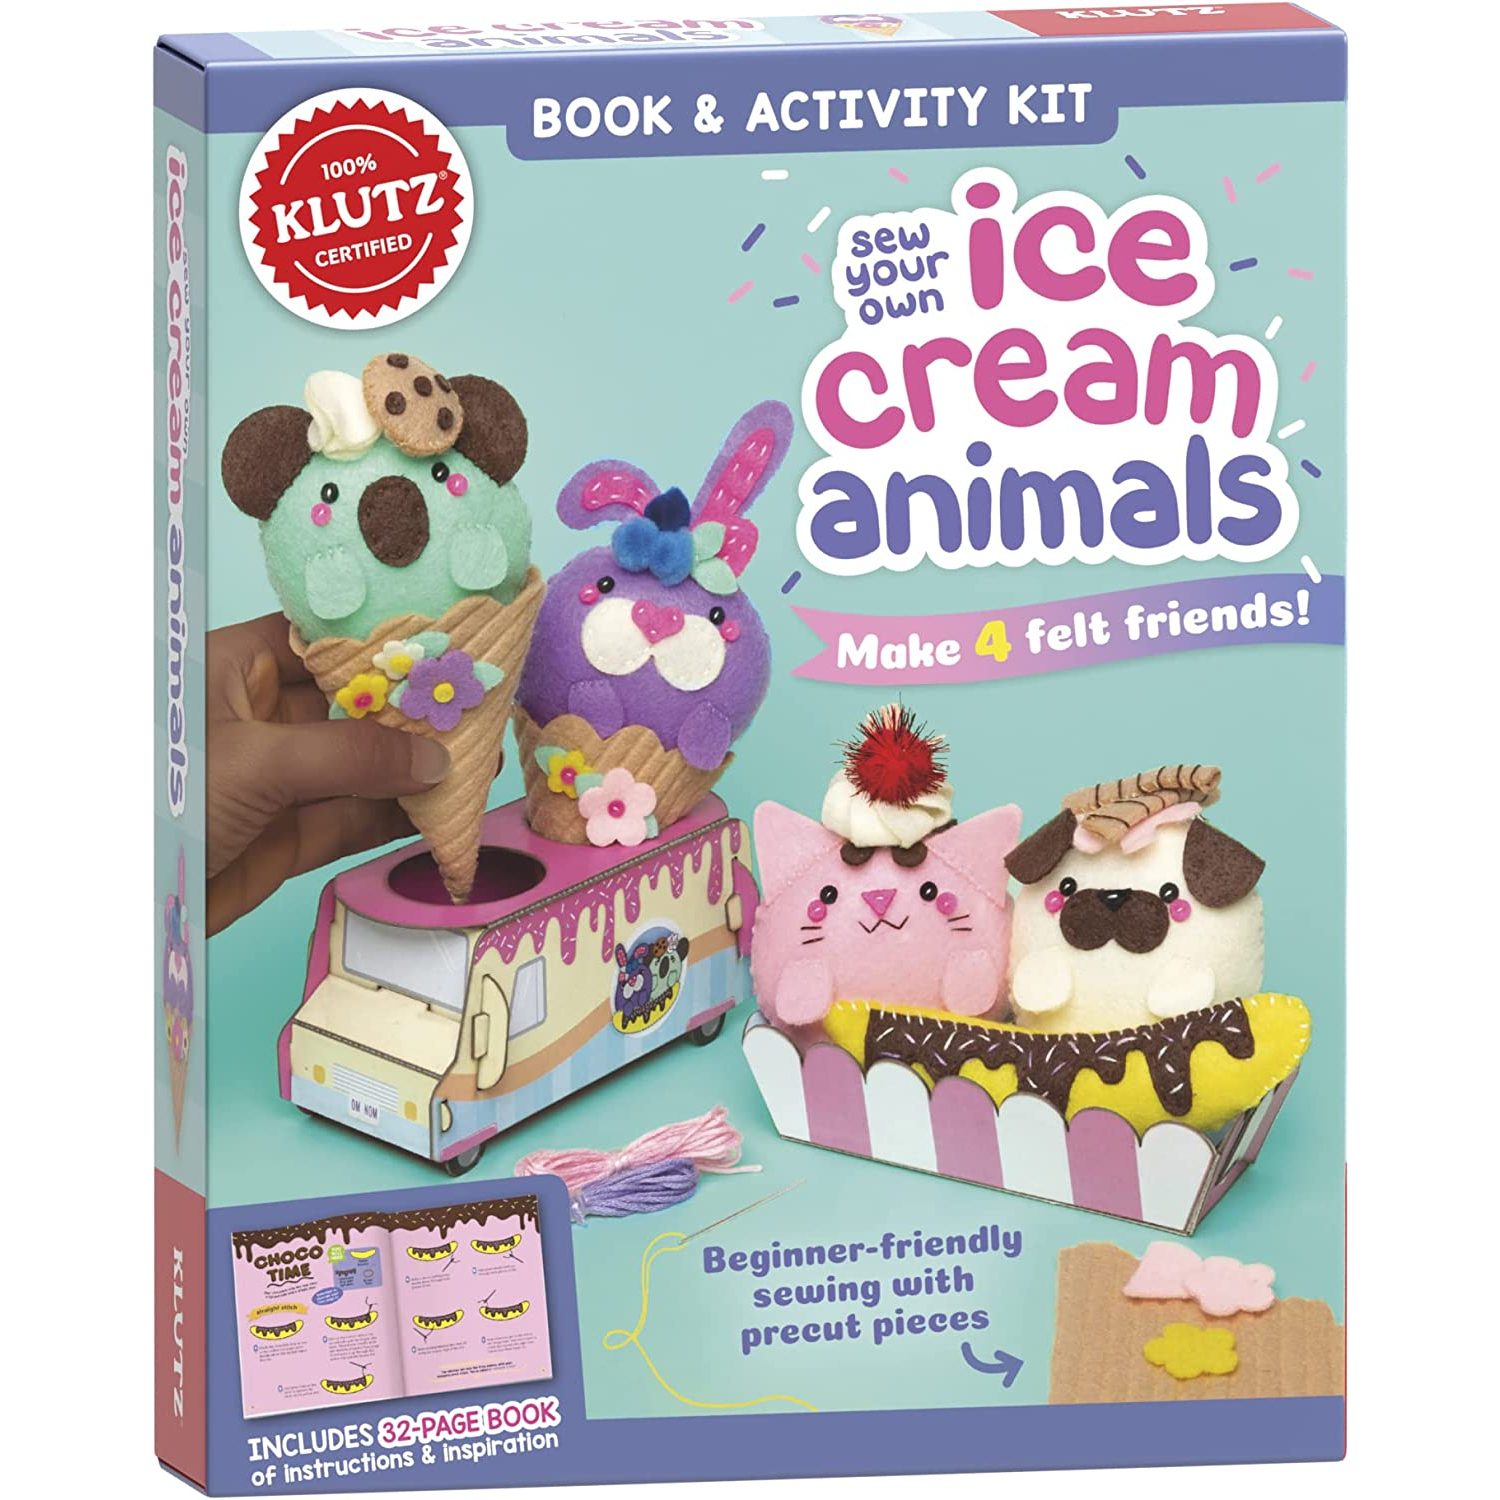 sew-your-own-ice-cream-animals-40-page-book-of-crystal-clear-instructions-for-making-four-ice-cream-animals